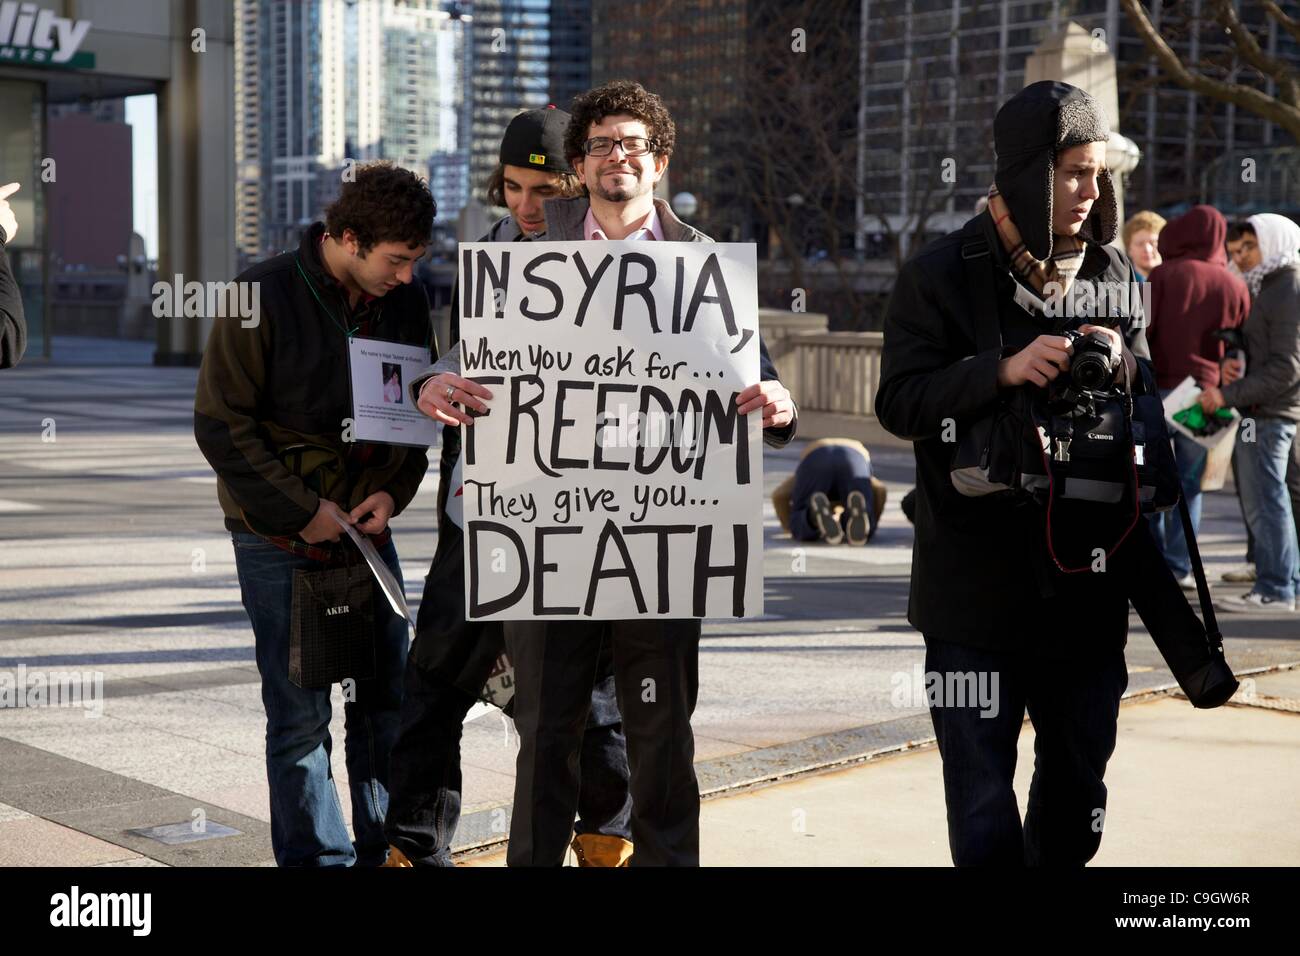 Chicago, USA, 29/12/2011. Protesters in Pioneer Court during anti-Syrian government protest. The demonstrators gathered to protest the Syrian government's treatment of its citizens. Stock Photo